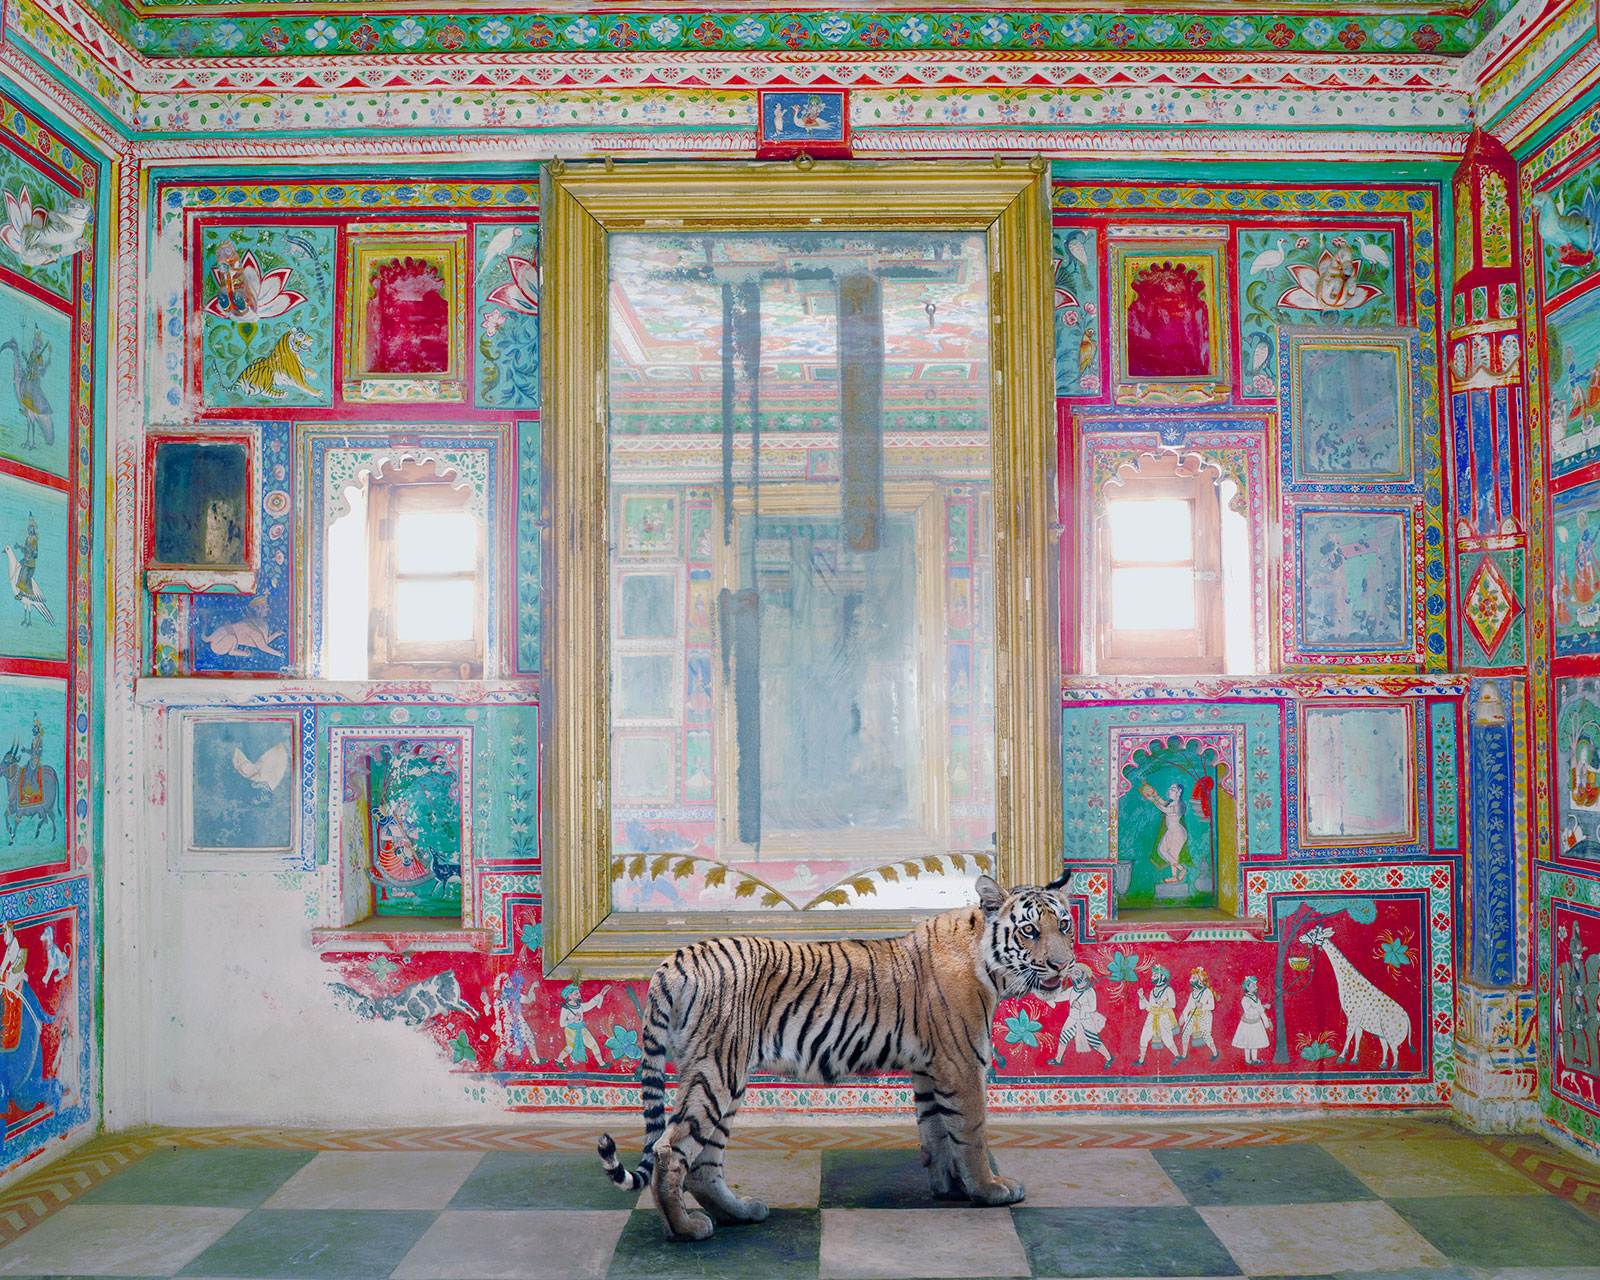 tiger in ornate Indian temple